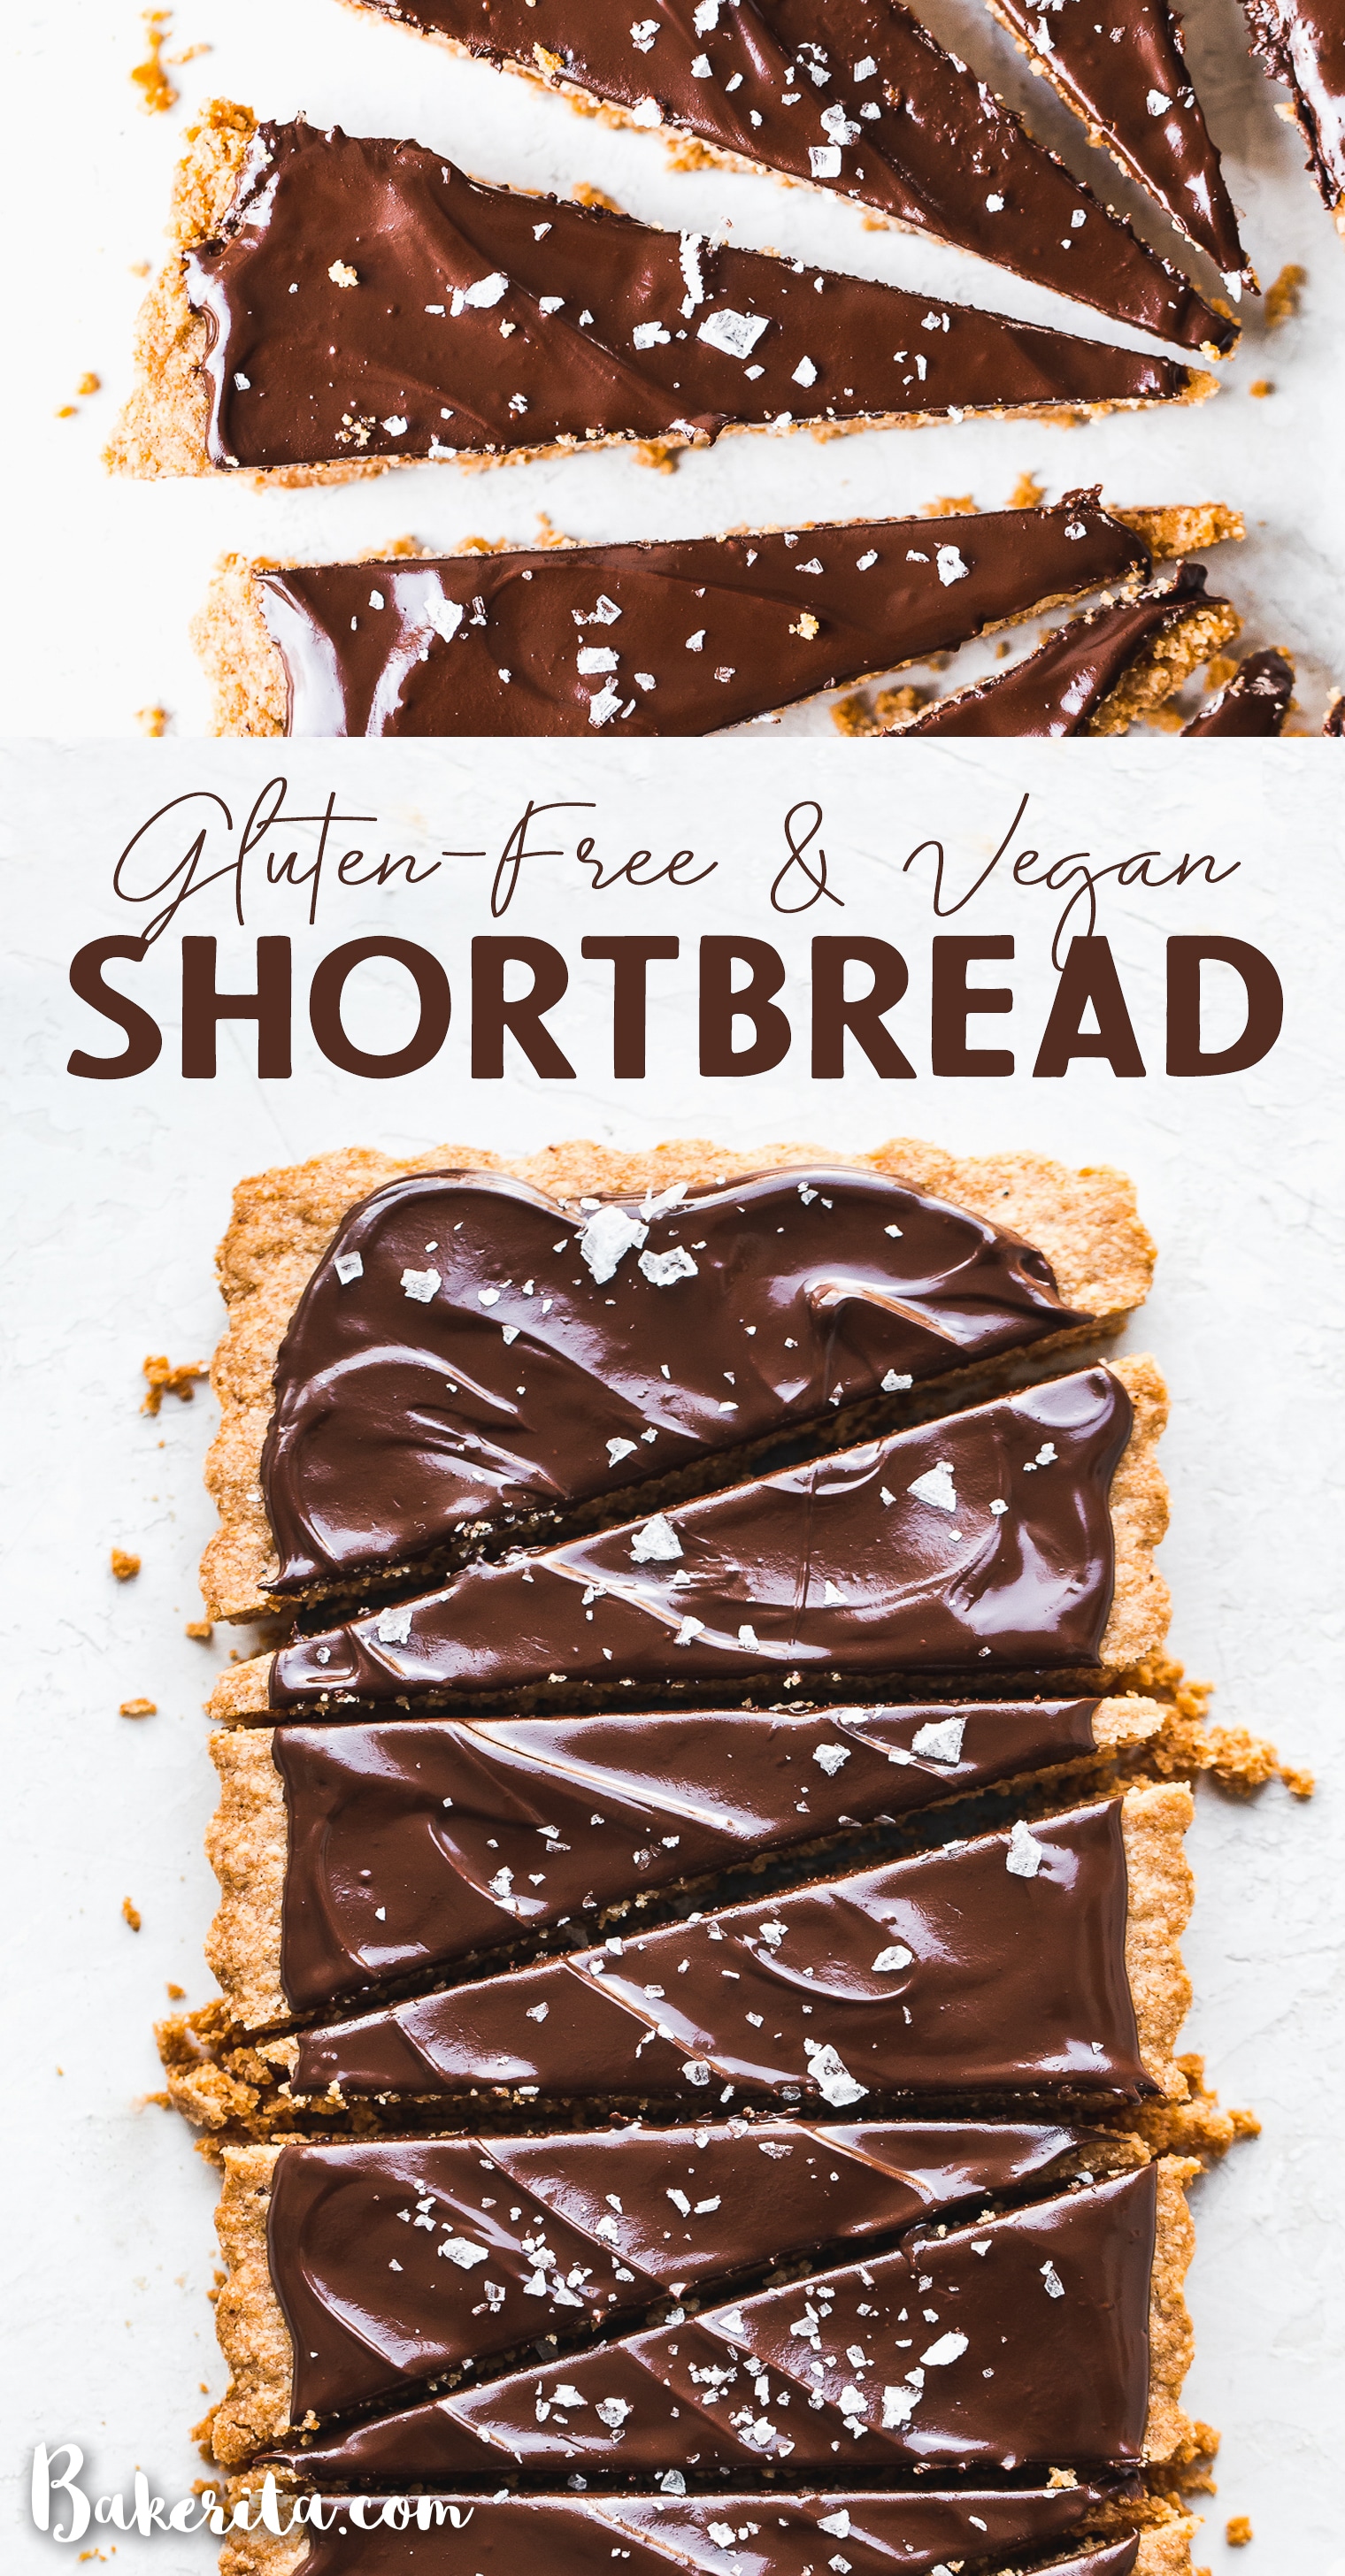 This Gluten-Free Vegan Shortbread recipe tastes rich and buttery - without the butter. This simple recipe is made with just FOUR ingredients and can be topped with chocolate for an extra-special holiday treat.